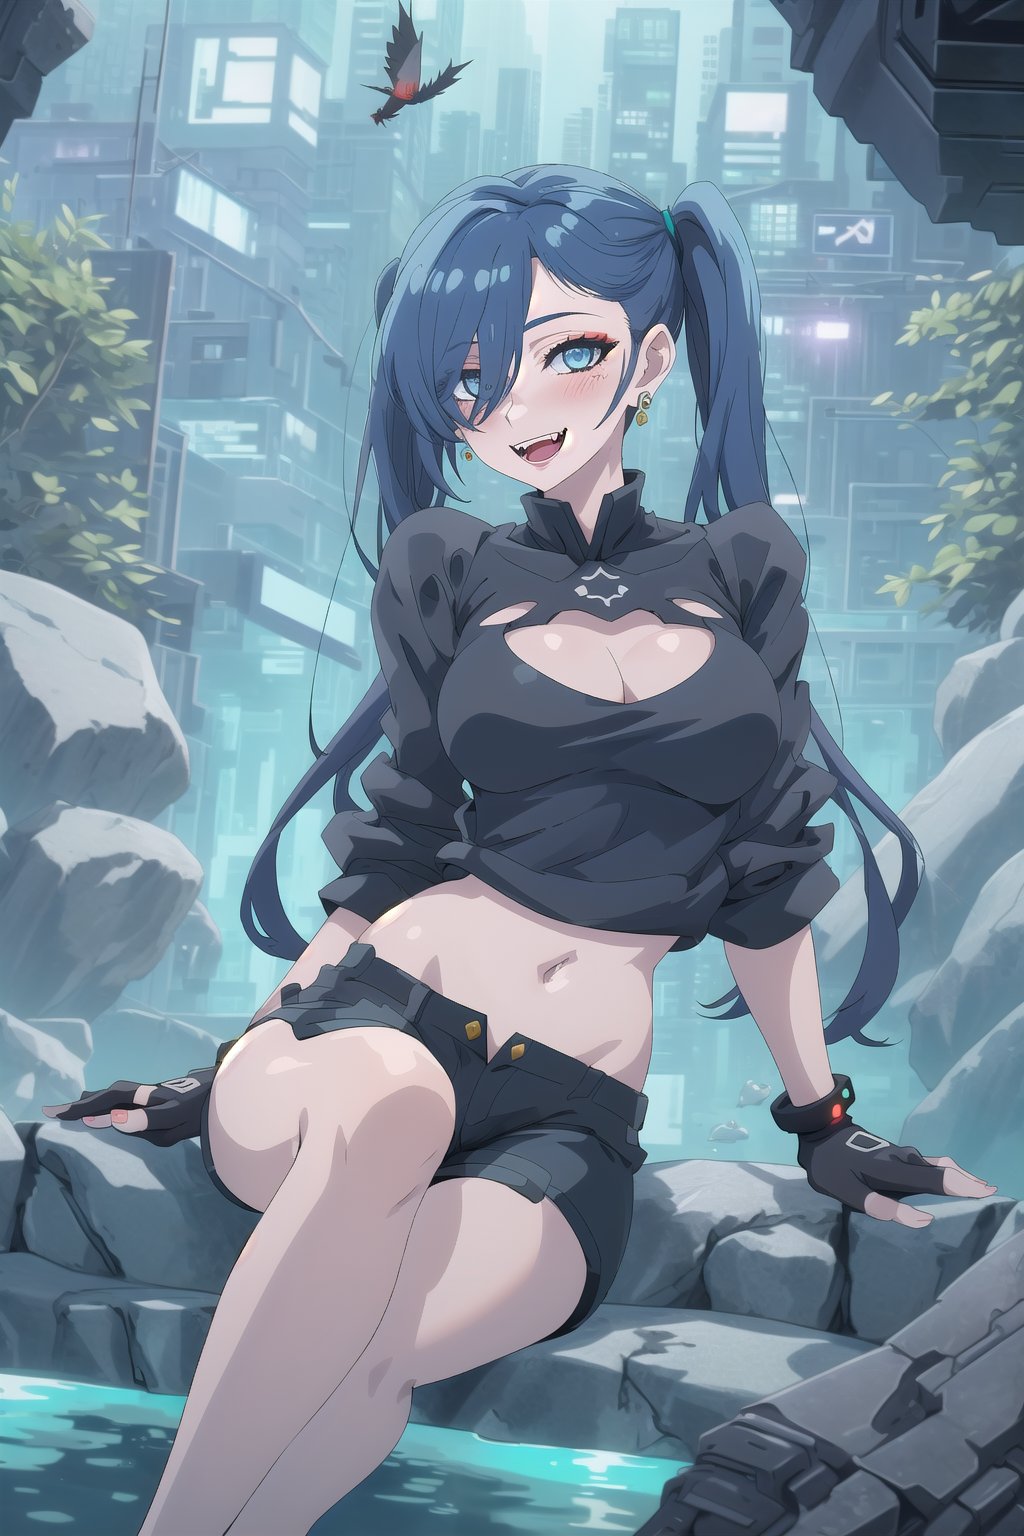 nier anime style illustration, best quality, masterpiece High resolution, good detail, bright colors, HDR, 4K. Dolby vision high. 

Girl with long straight black hair, long twin pigtails (hair covering one eye), blue eyes, blushing, blue earrings 

Stylish Cyberpunk Black Crop Top 

Showing navel, exposed navel 

Elegant cyberpunk black shorts

Barefoot

Inside an underground cave 

Blue illumination in the depth of underground water 

Sitting on a rock 

Black Stylish Fingerless Cyberpunk Gloves

Blue natural lighting

Flirty smile (yandere smile). Happy, excited. Open mouth 

Showing fangs, exposed fangs

jirai kei makeup